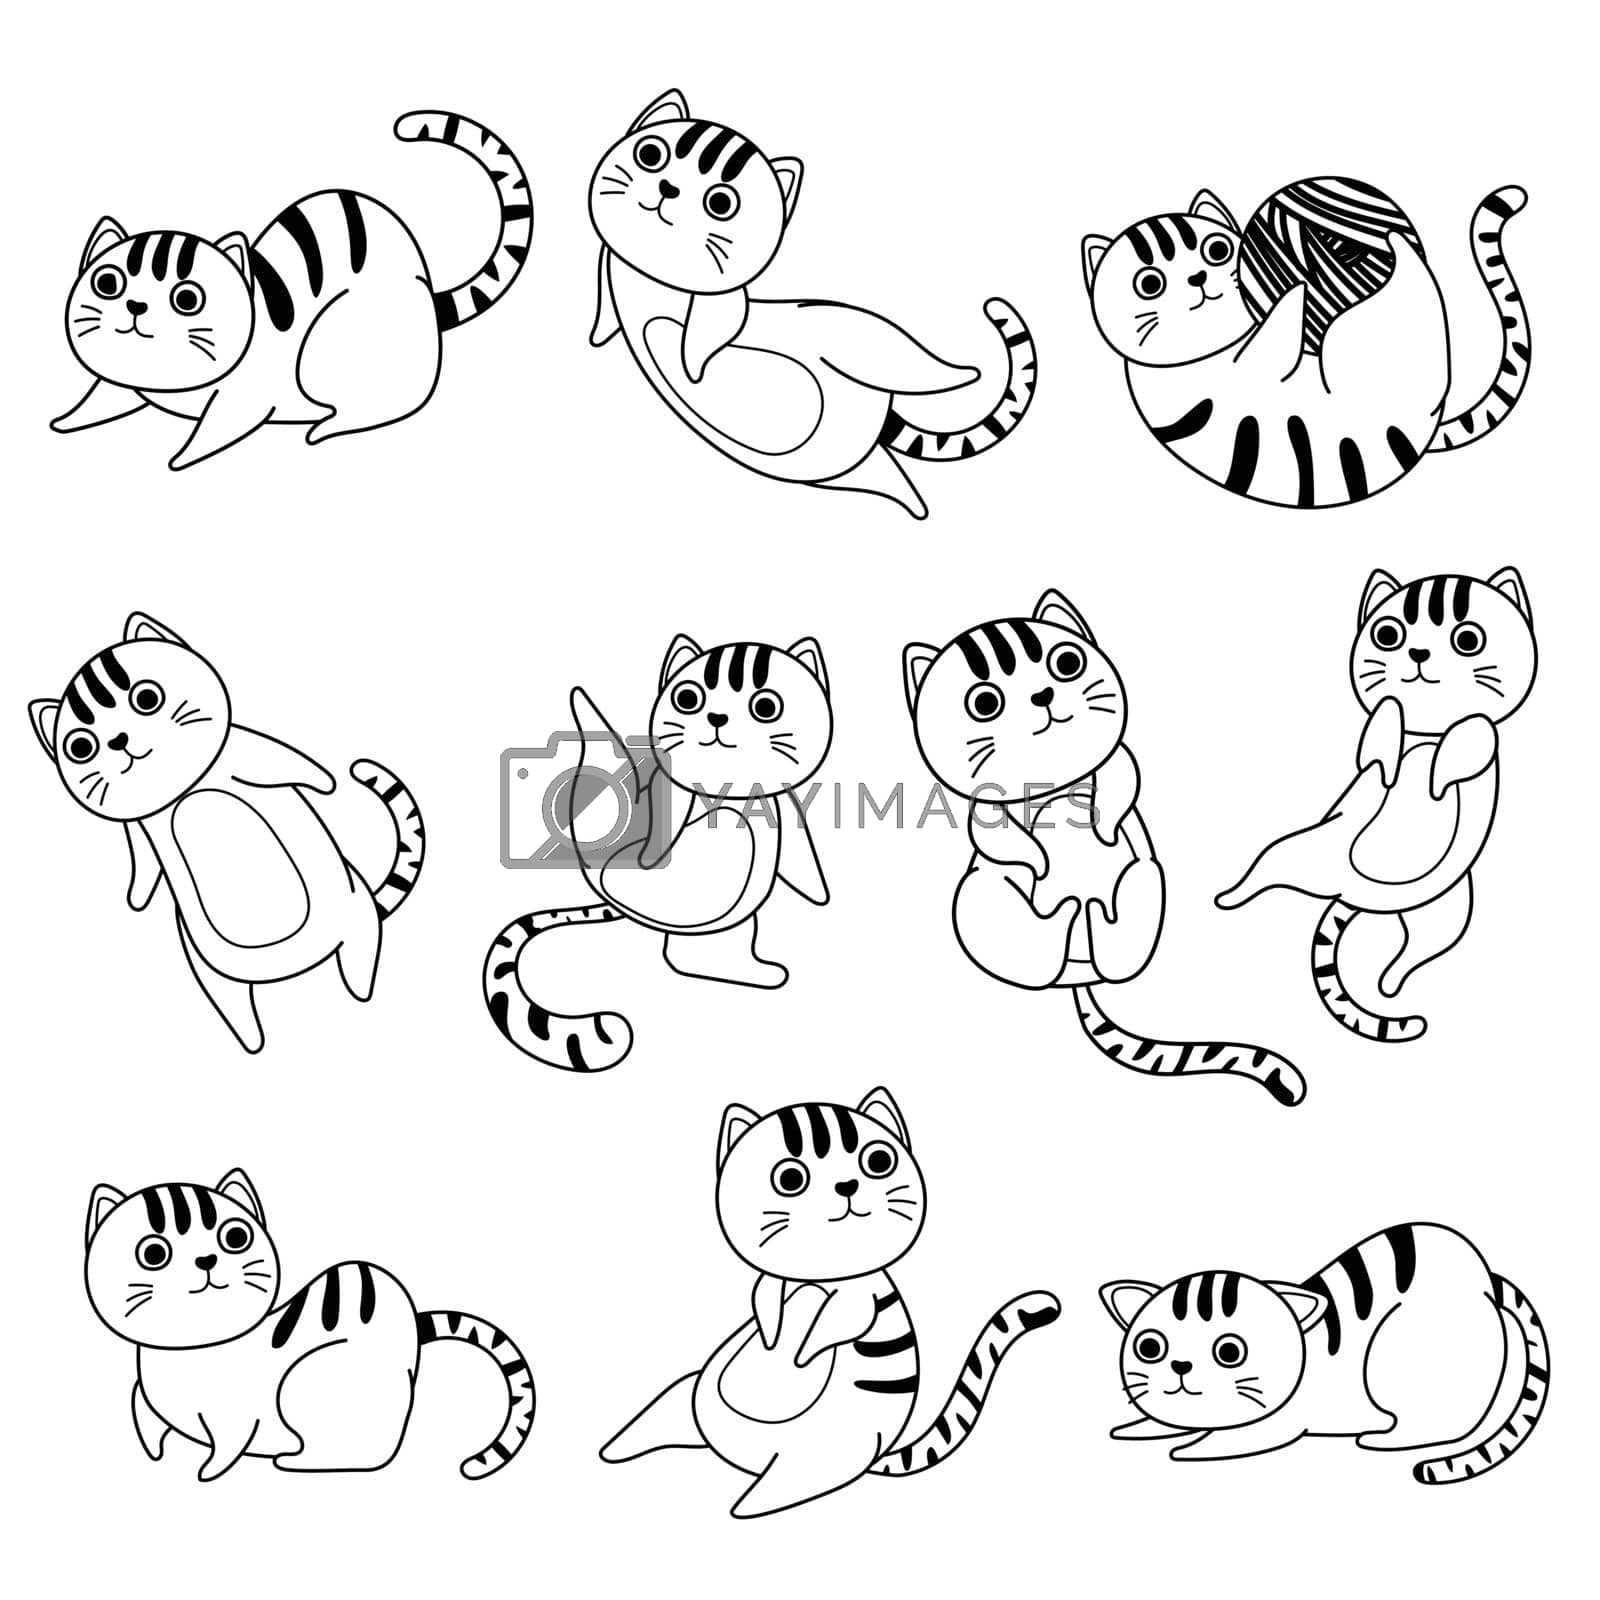 Royalty free image of Cat cartoon drawing by valueinvestor